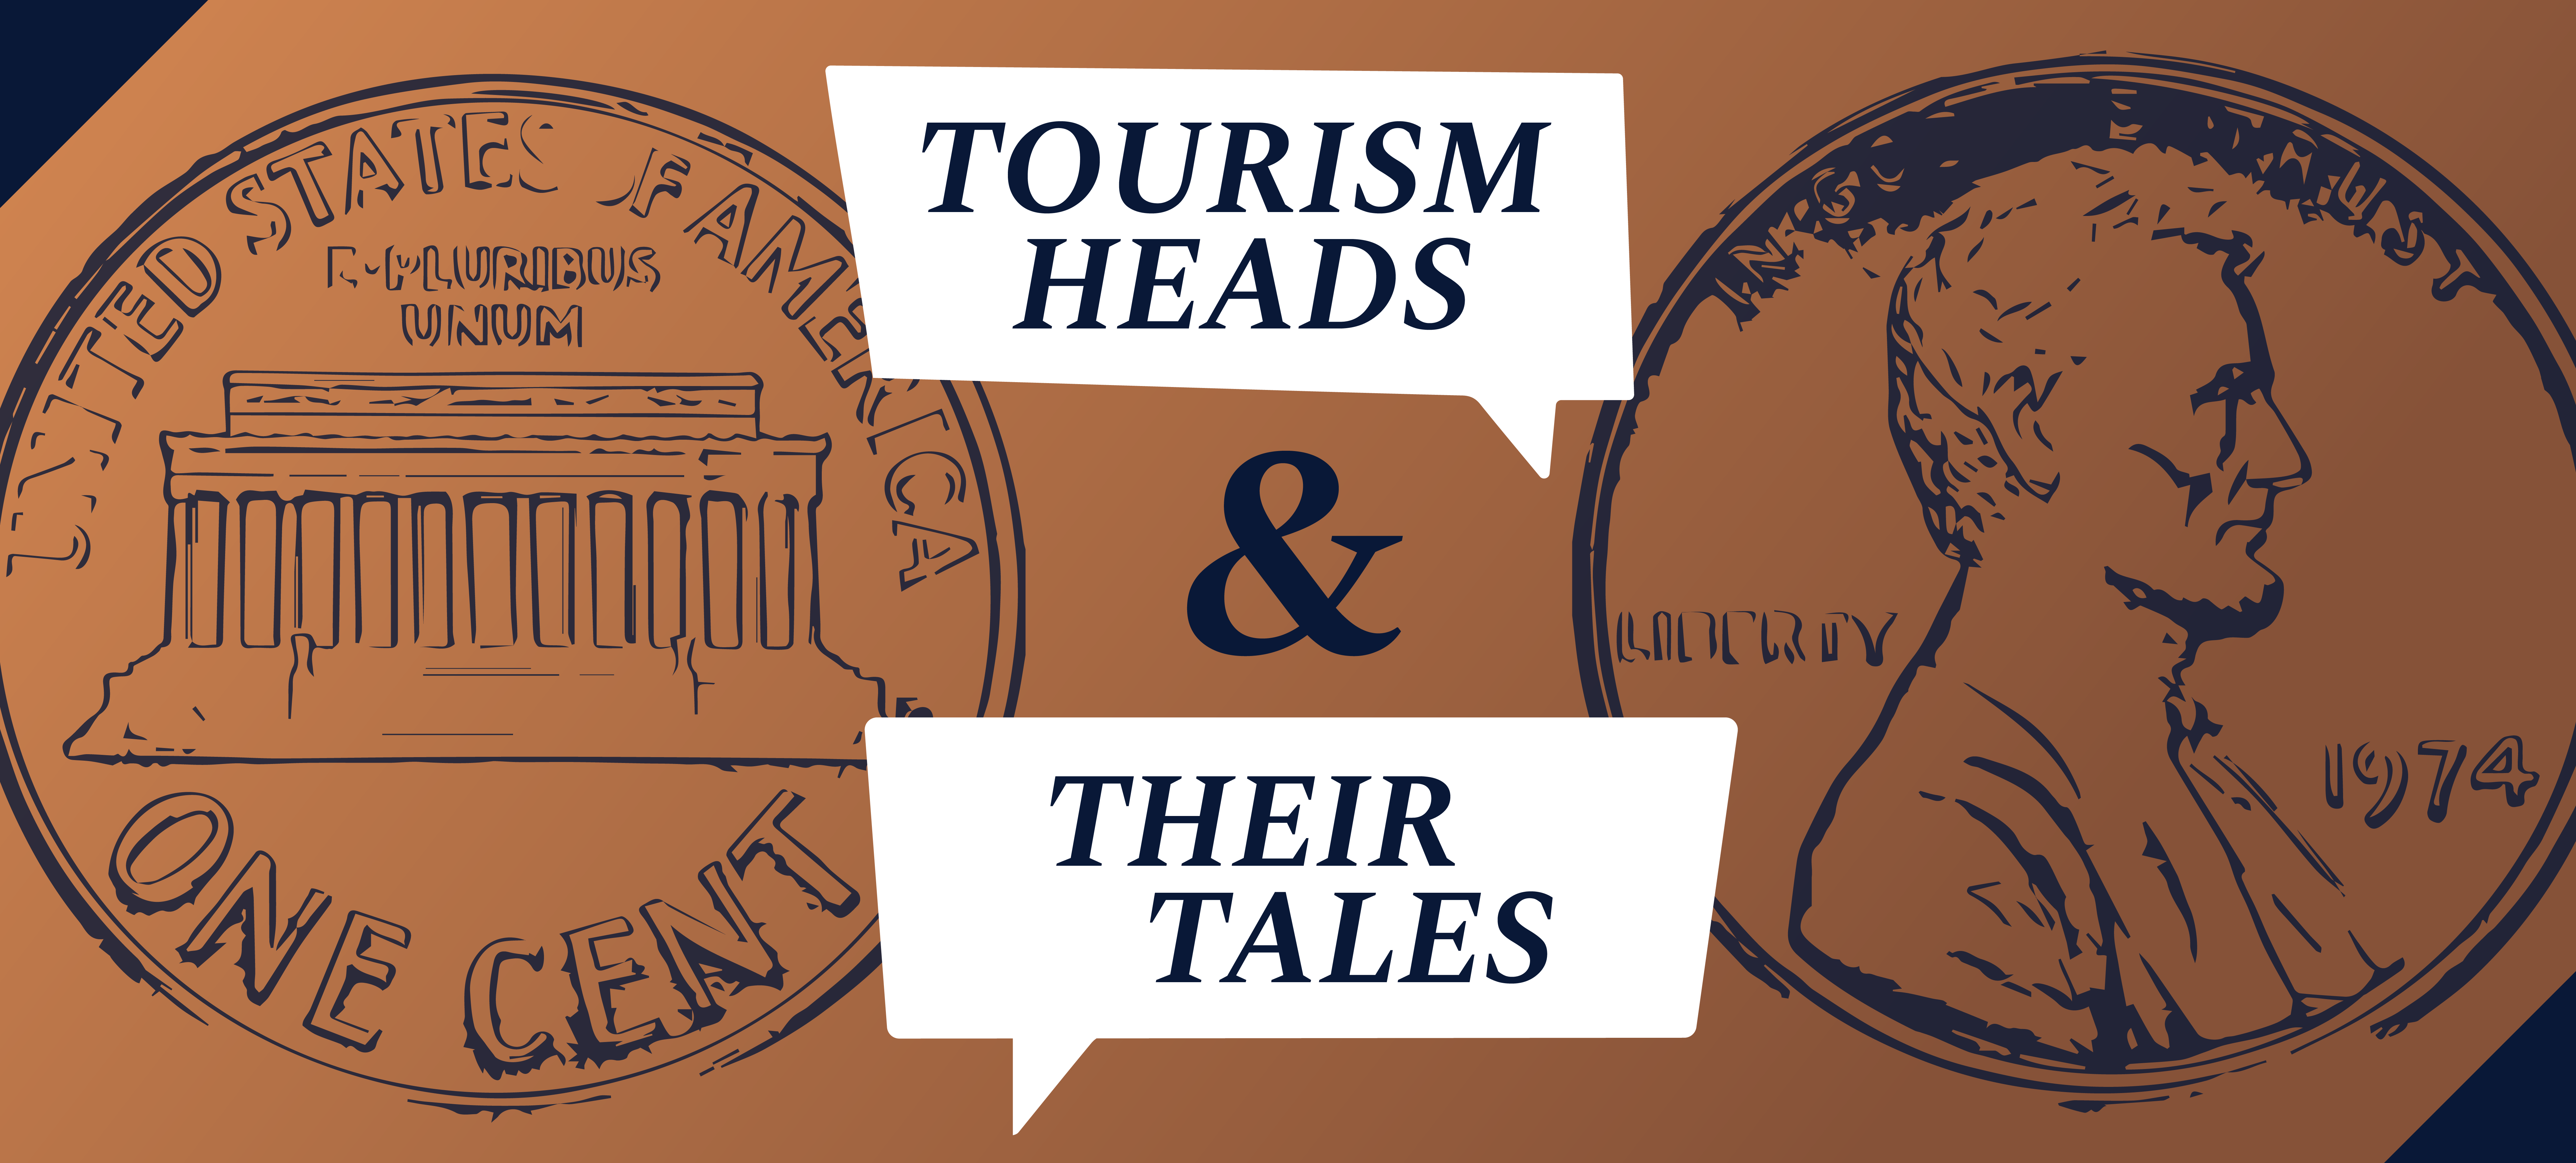 Eddy Alexander launches New Tourism Industry  Podcast: “Tourism Heads and Their Tales”